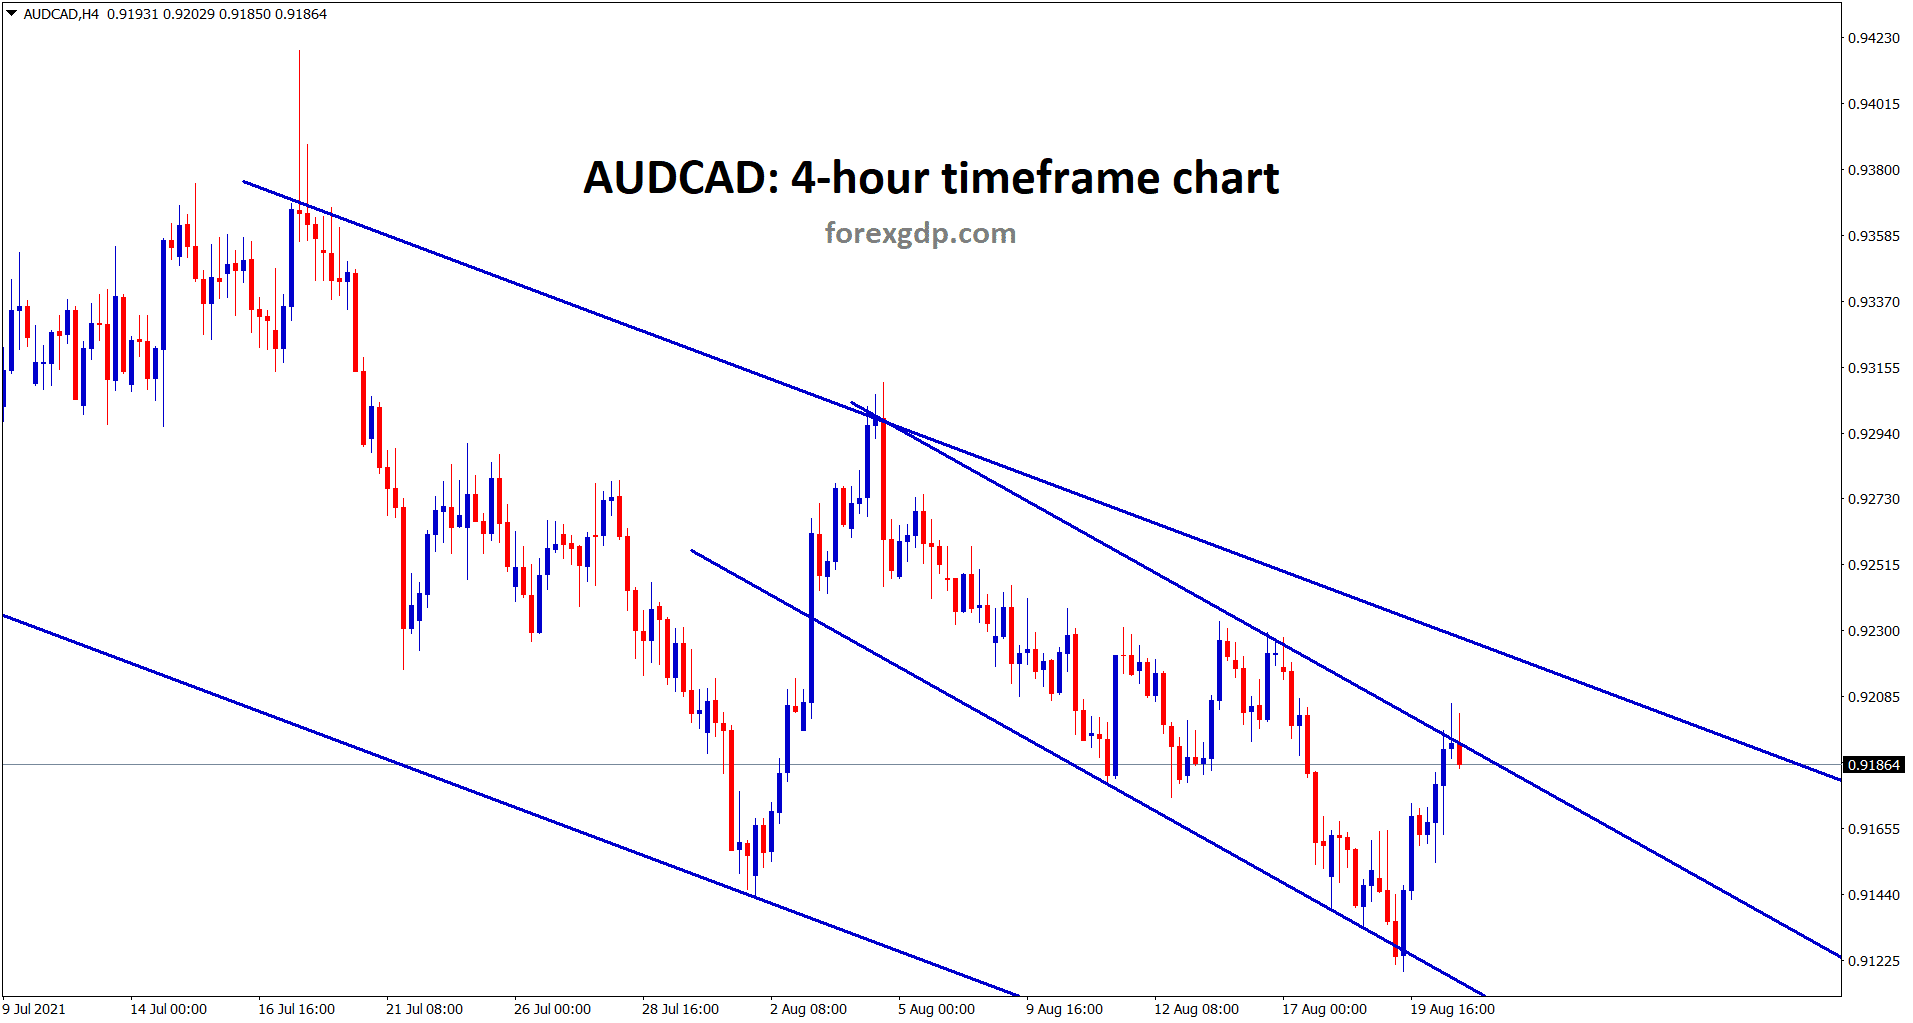 AUDCAD hits the lowe high of the minor descending channel